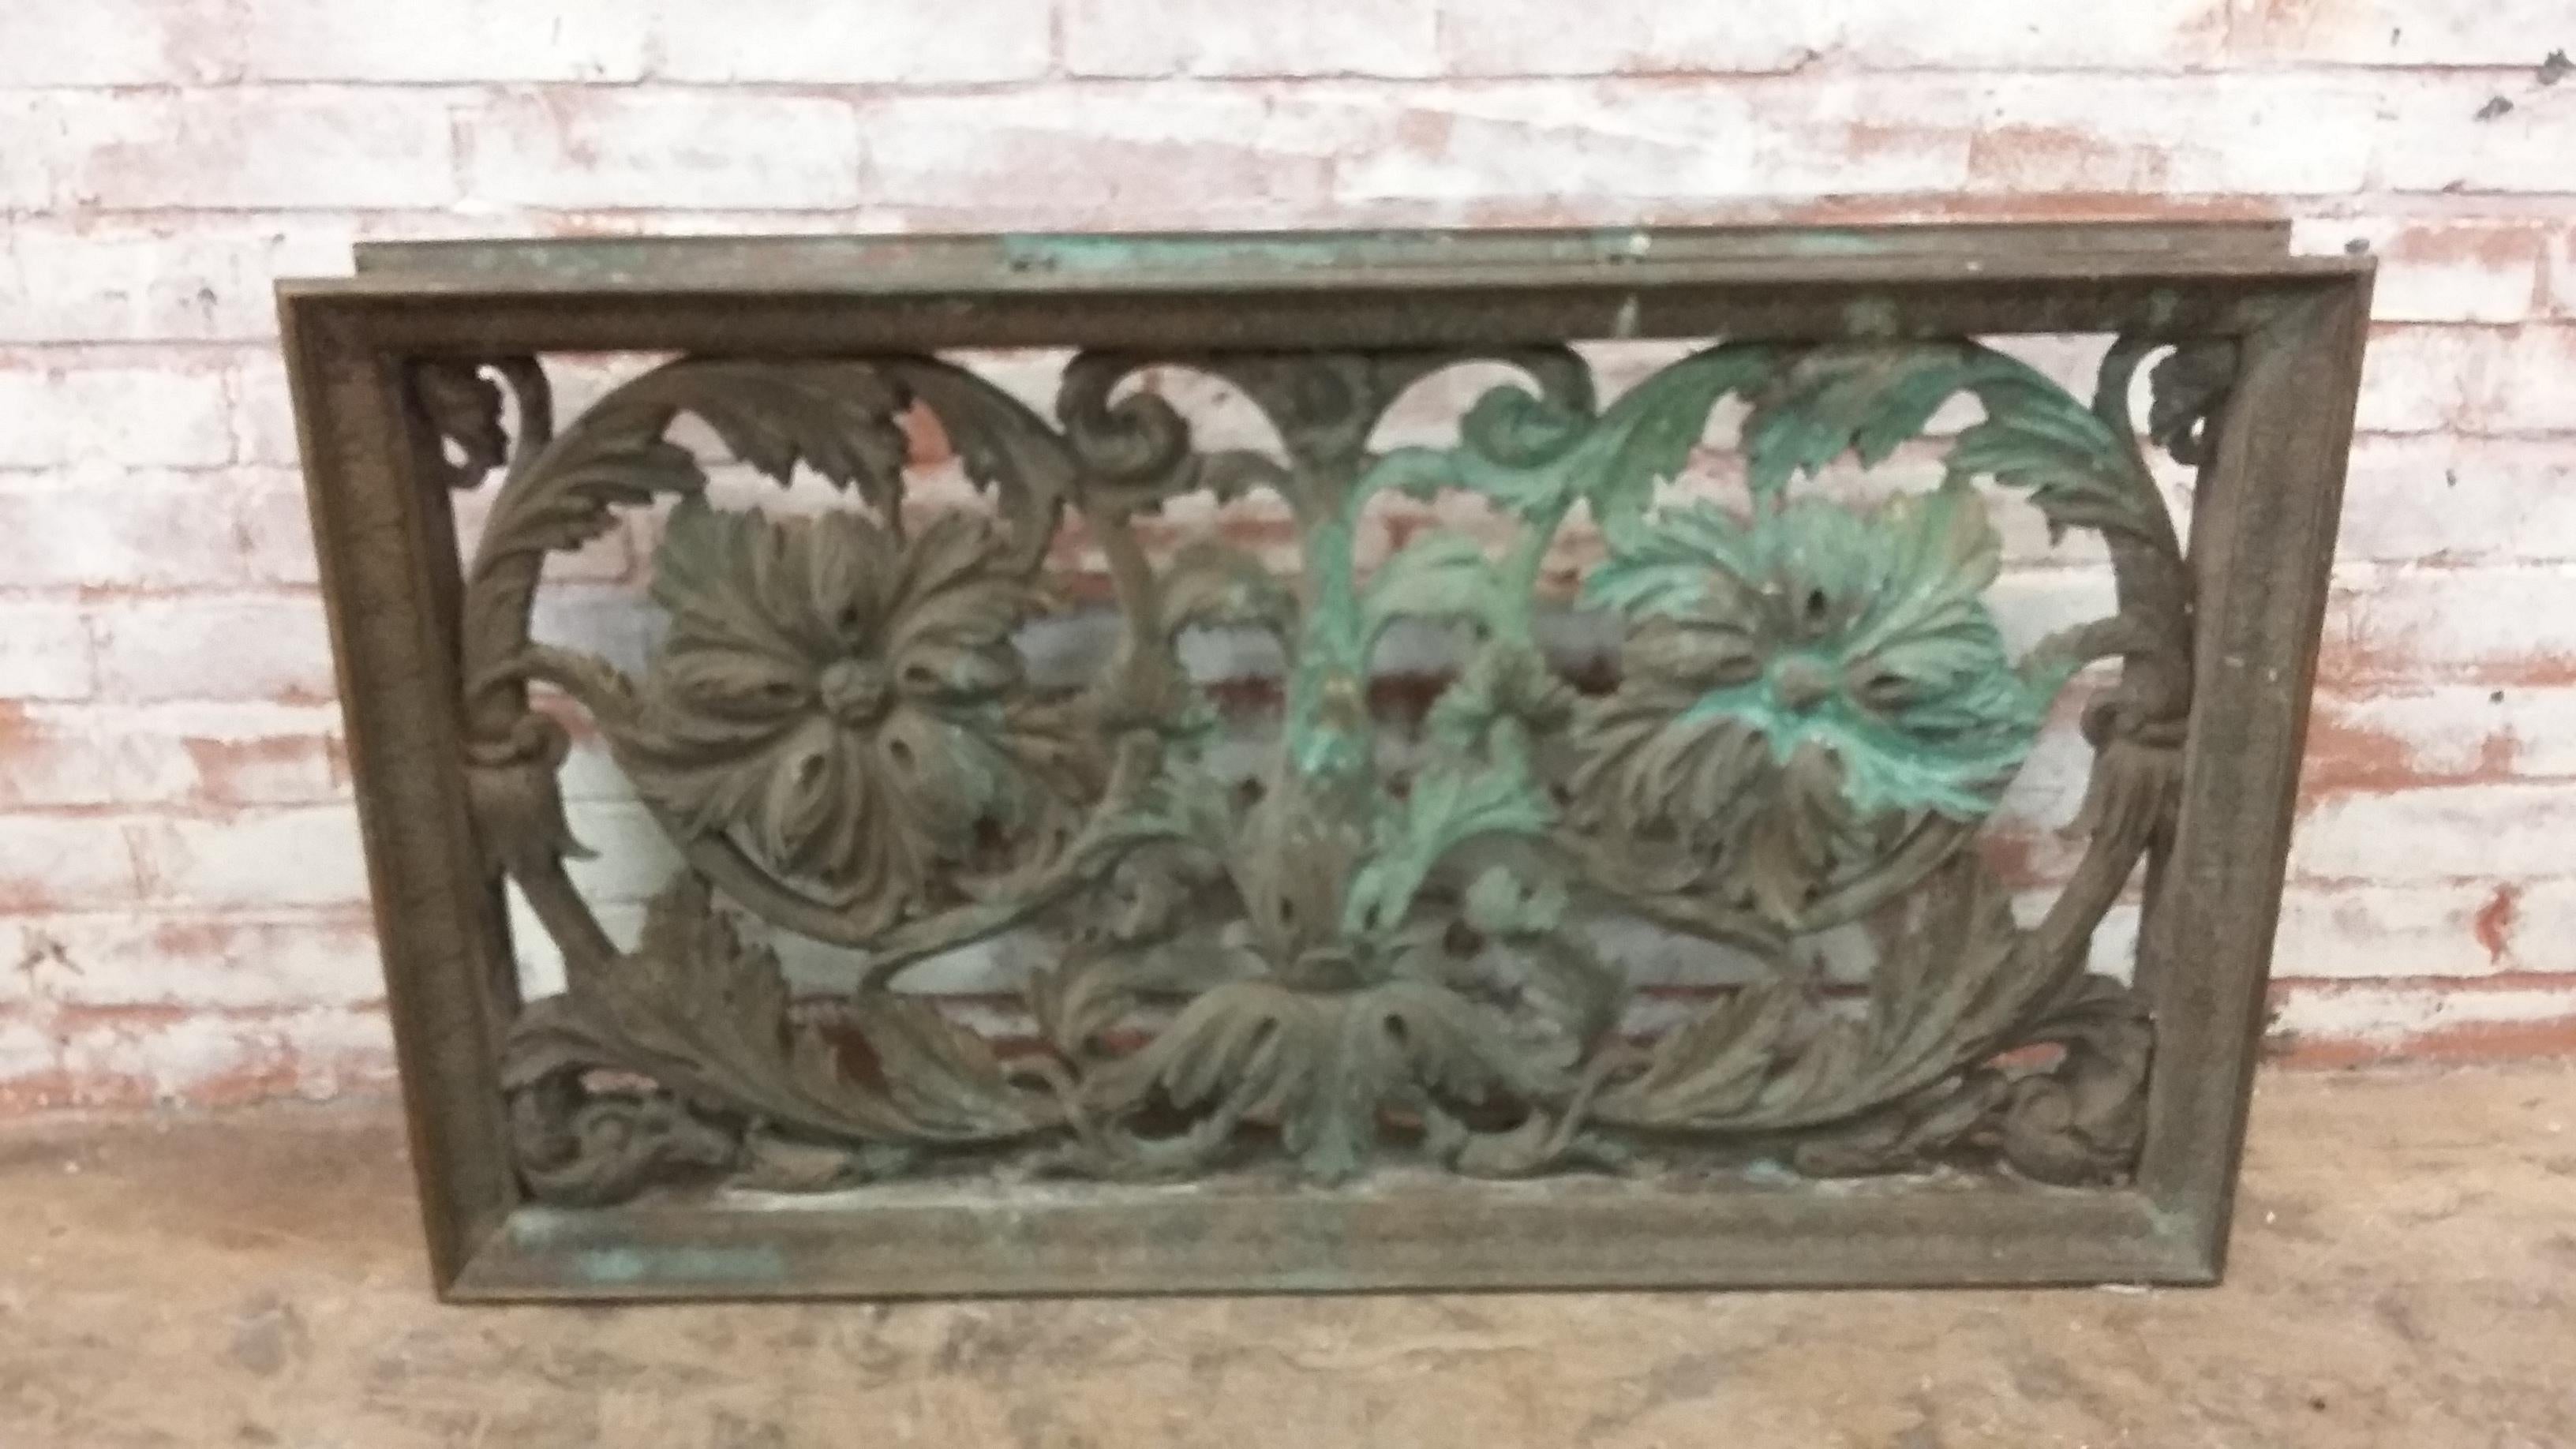 Solid bronze wall panel. Salvaged from a building in New York City. An extremely heavy ornate bronze casting. Possibly from a commercial building. Great natural patina finish. Floral motif.